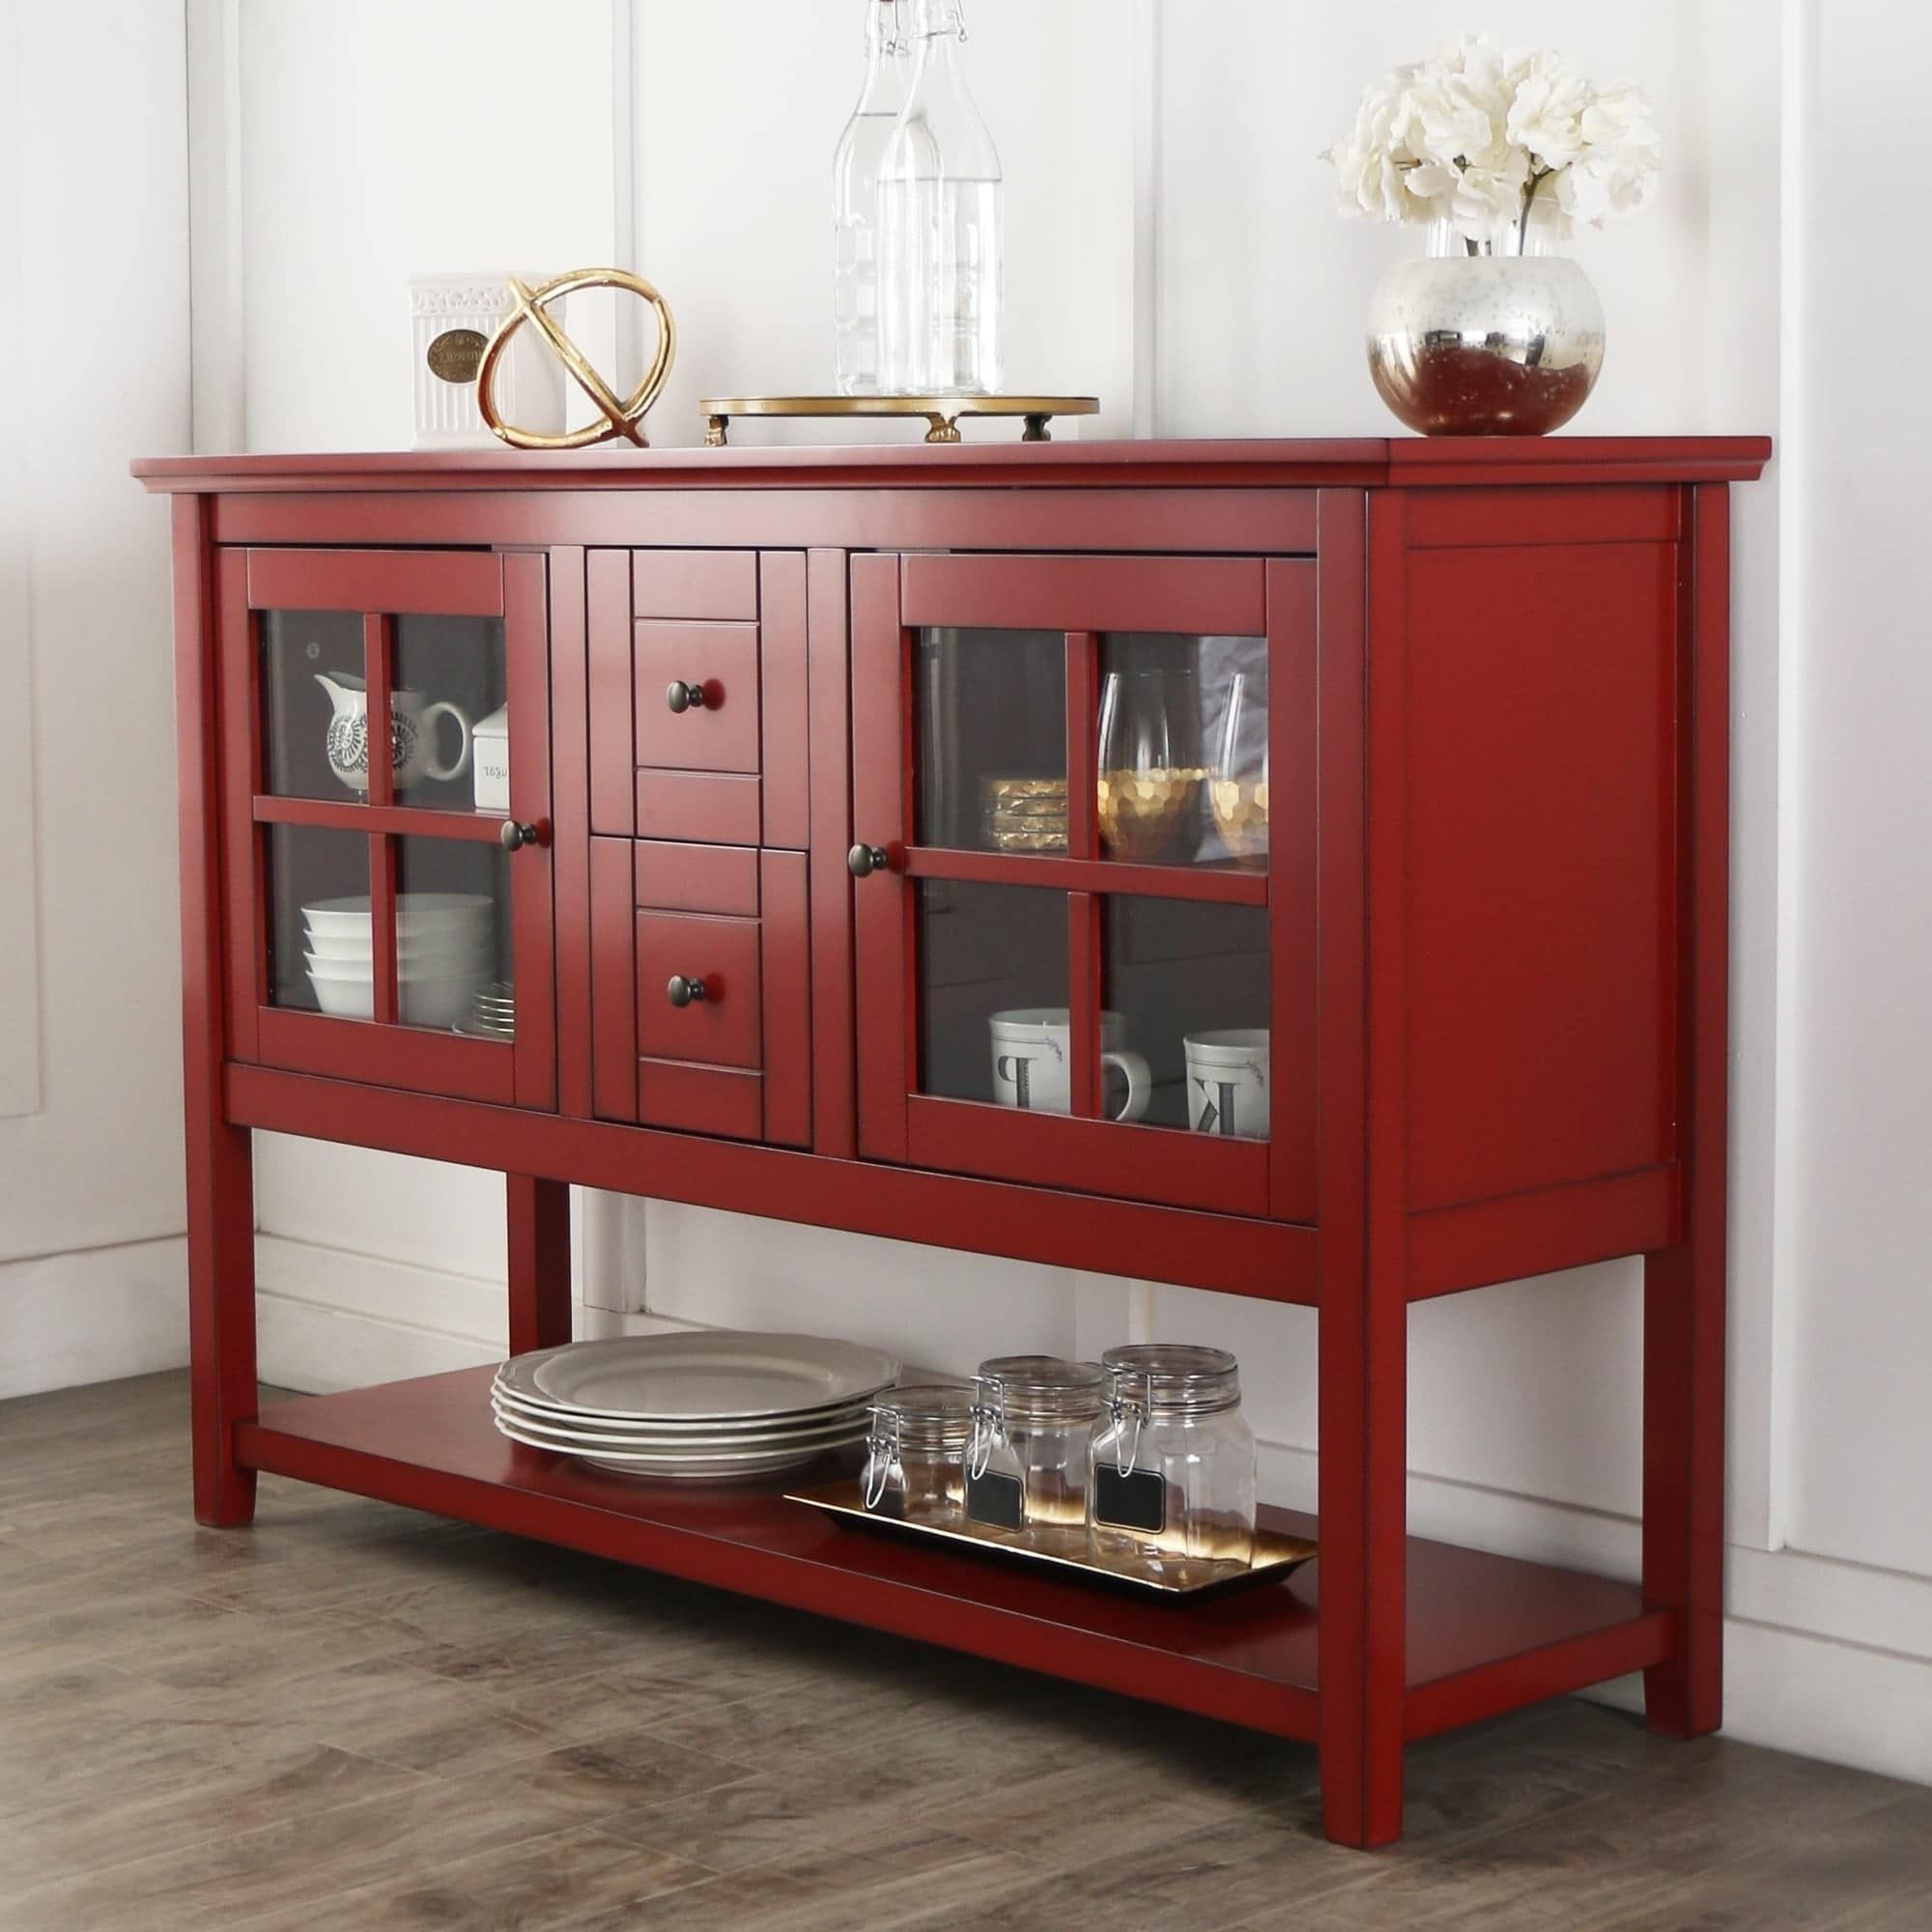 52" Buffet Tv Stand In Antique Red In 2019 | Naples With Regard To Simple Living Red Montego Buffets (Gallery 18 of 20)